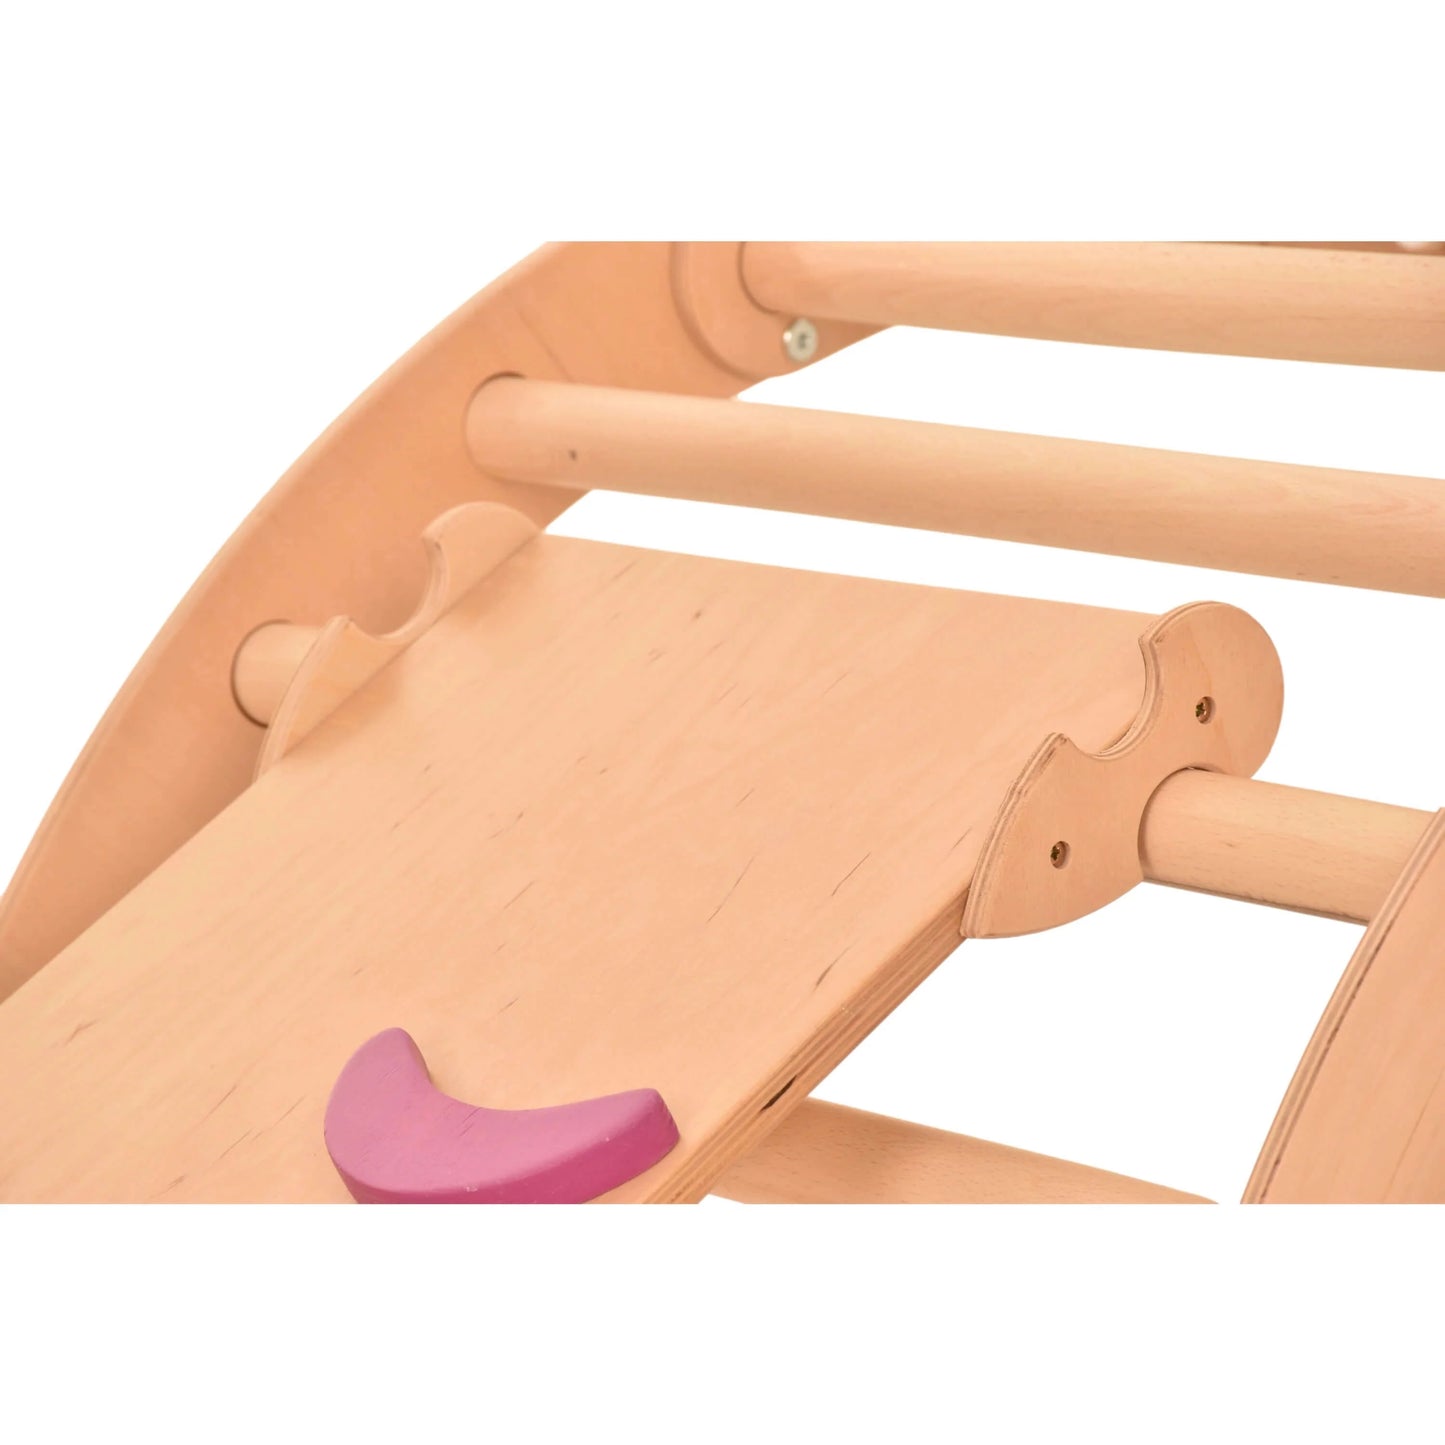 Sliding board with crescent handles - accessory for the climbing triangle